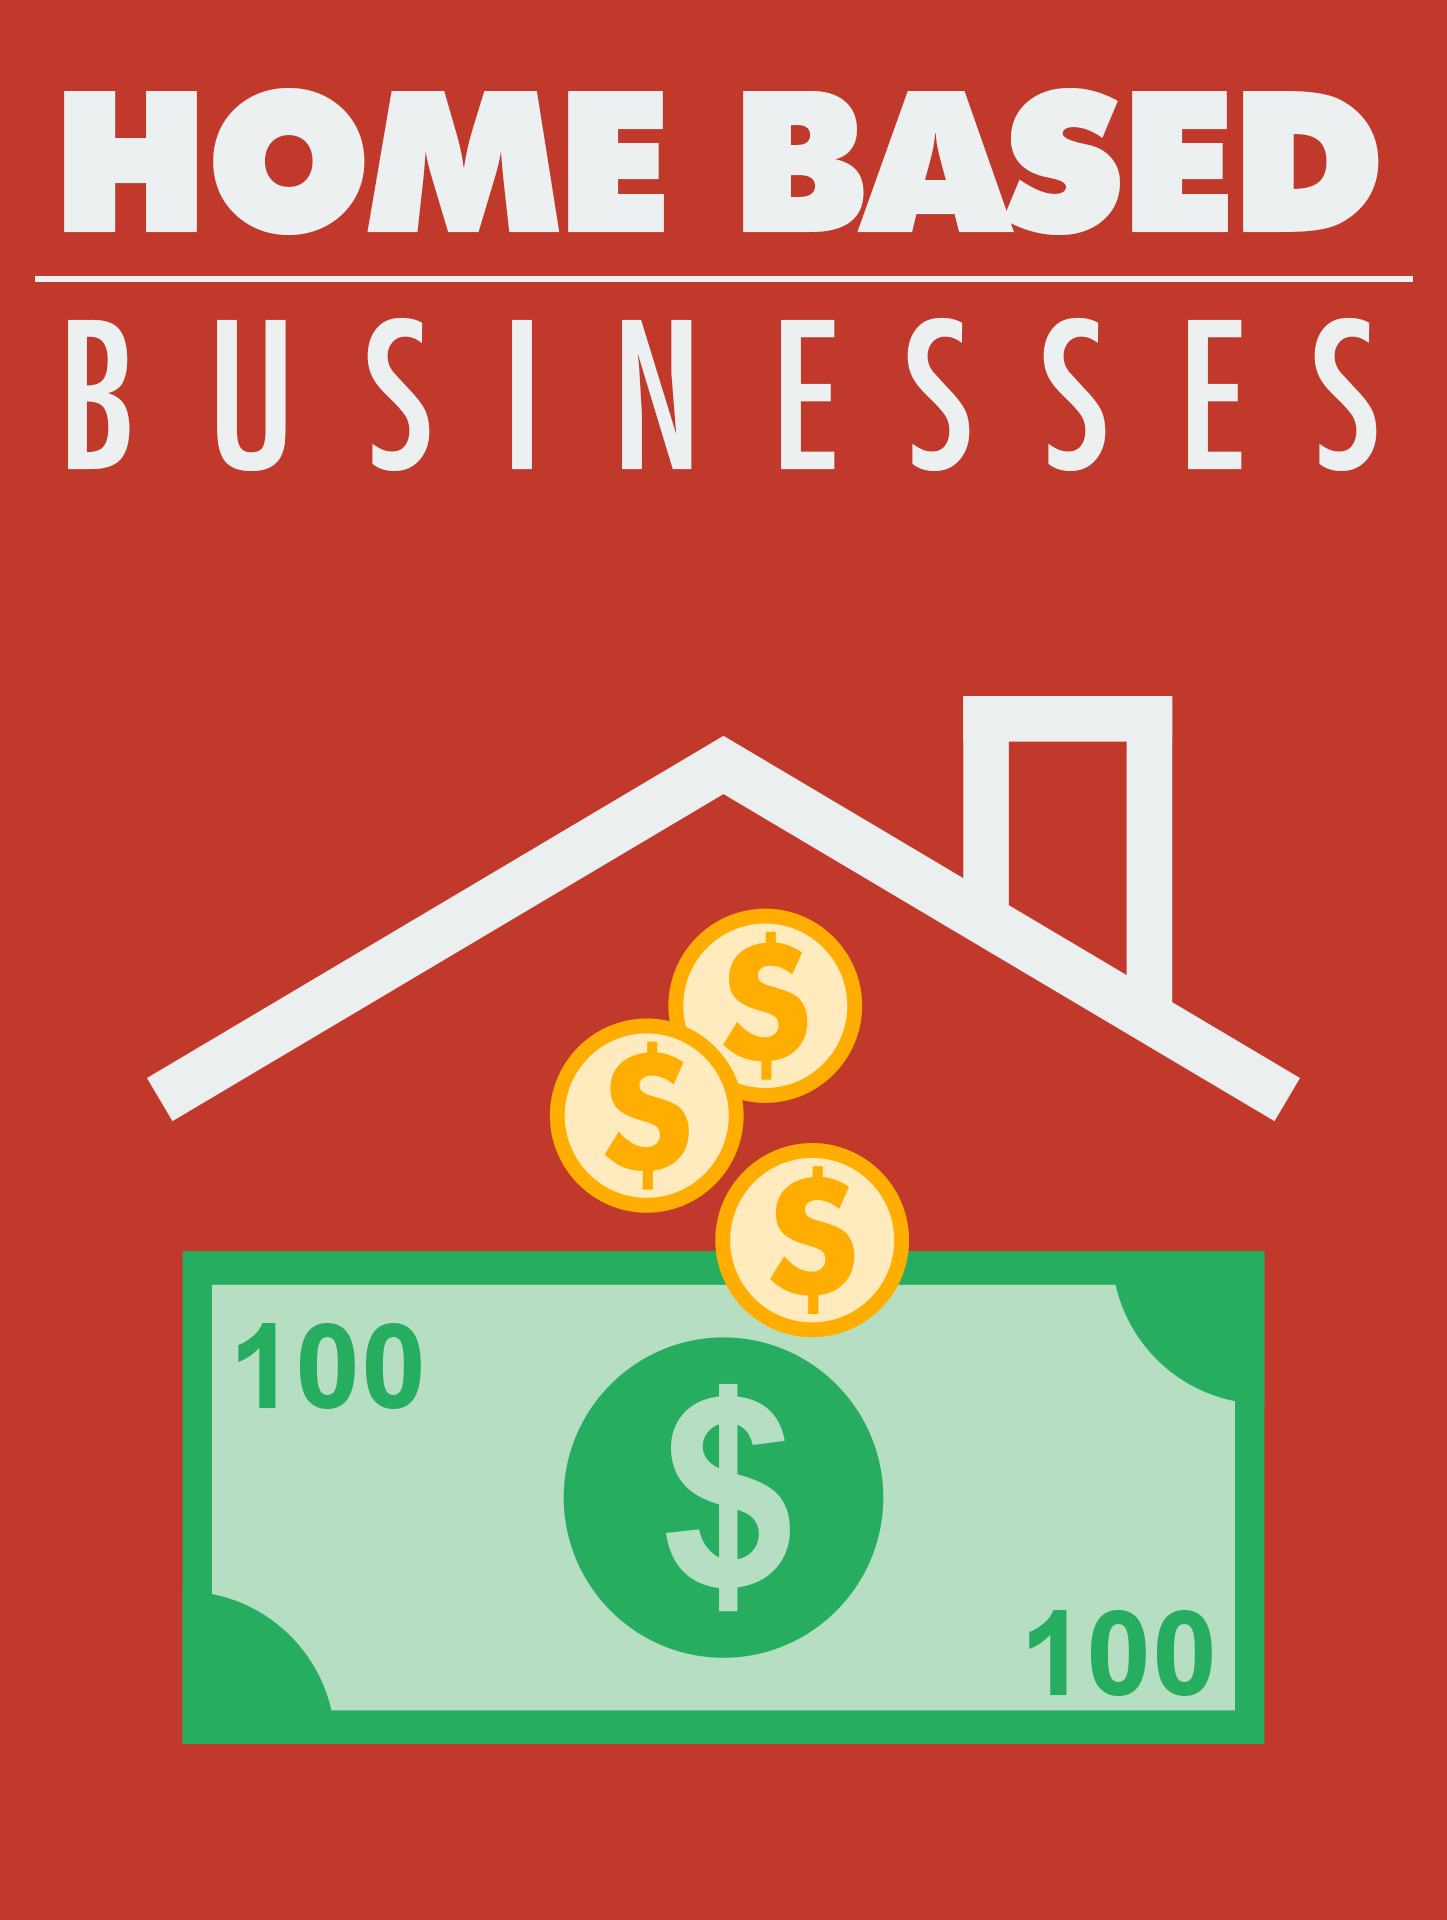 Home-Based-Businesses E graphic